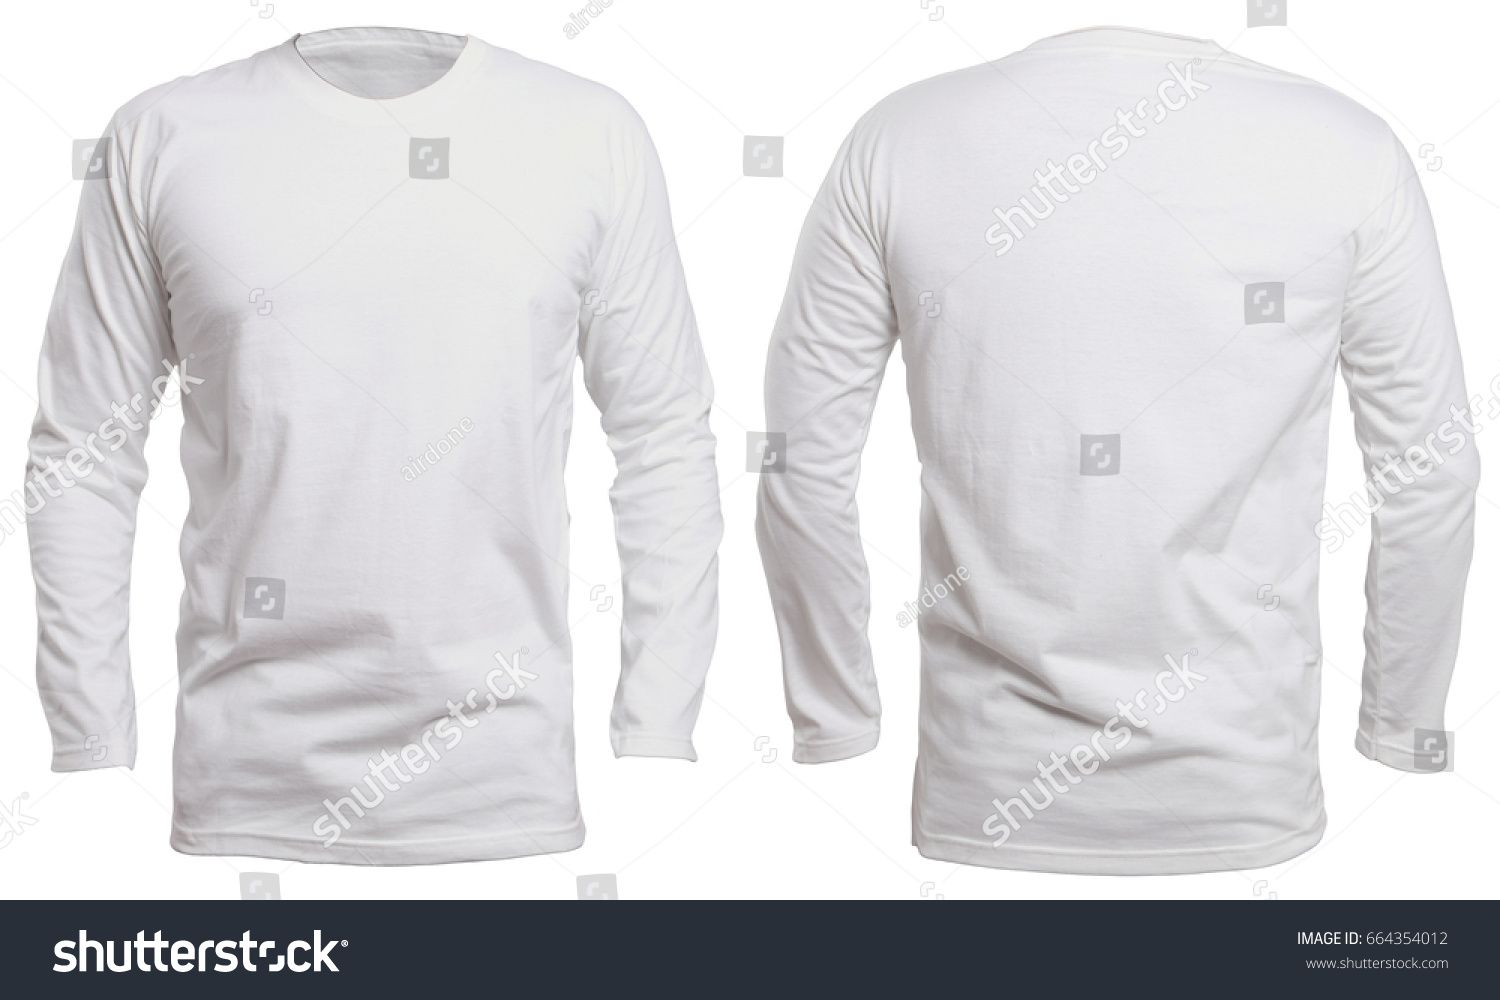 Blank long sleve shirt mock up template, front and back view, isolated on white, plain white t-shirt mockup. Long sleeved tee design presentation for print. #664354012